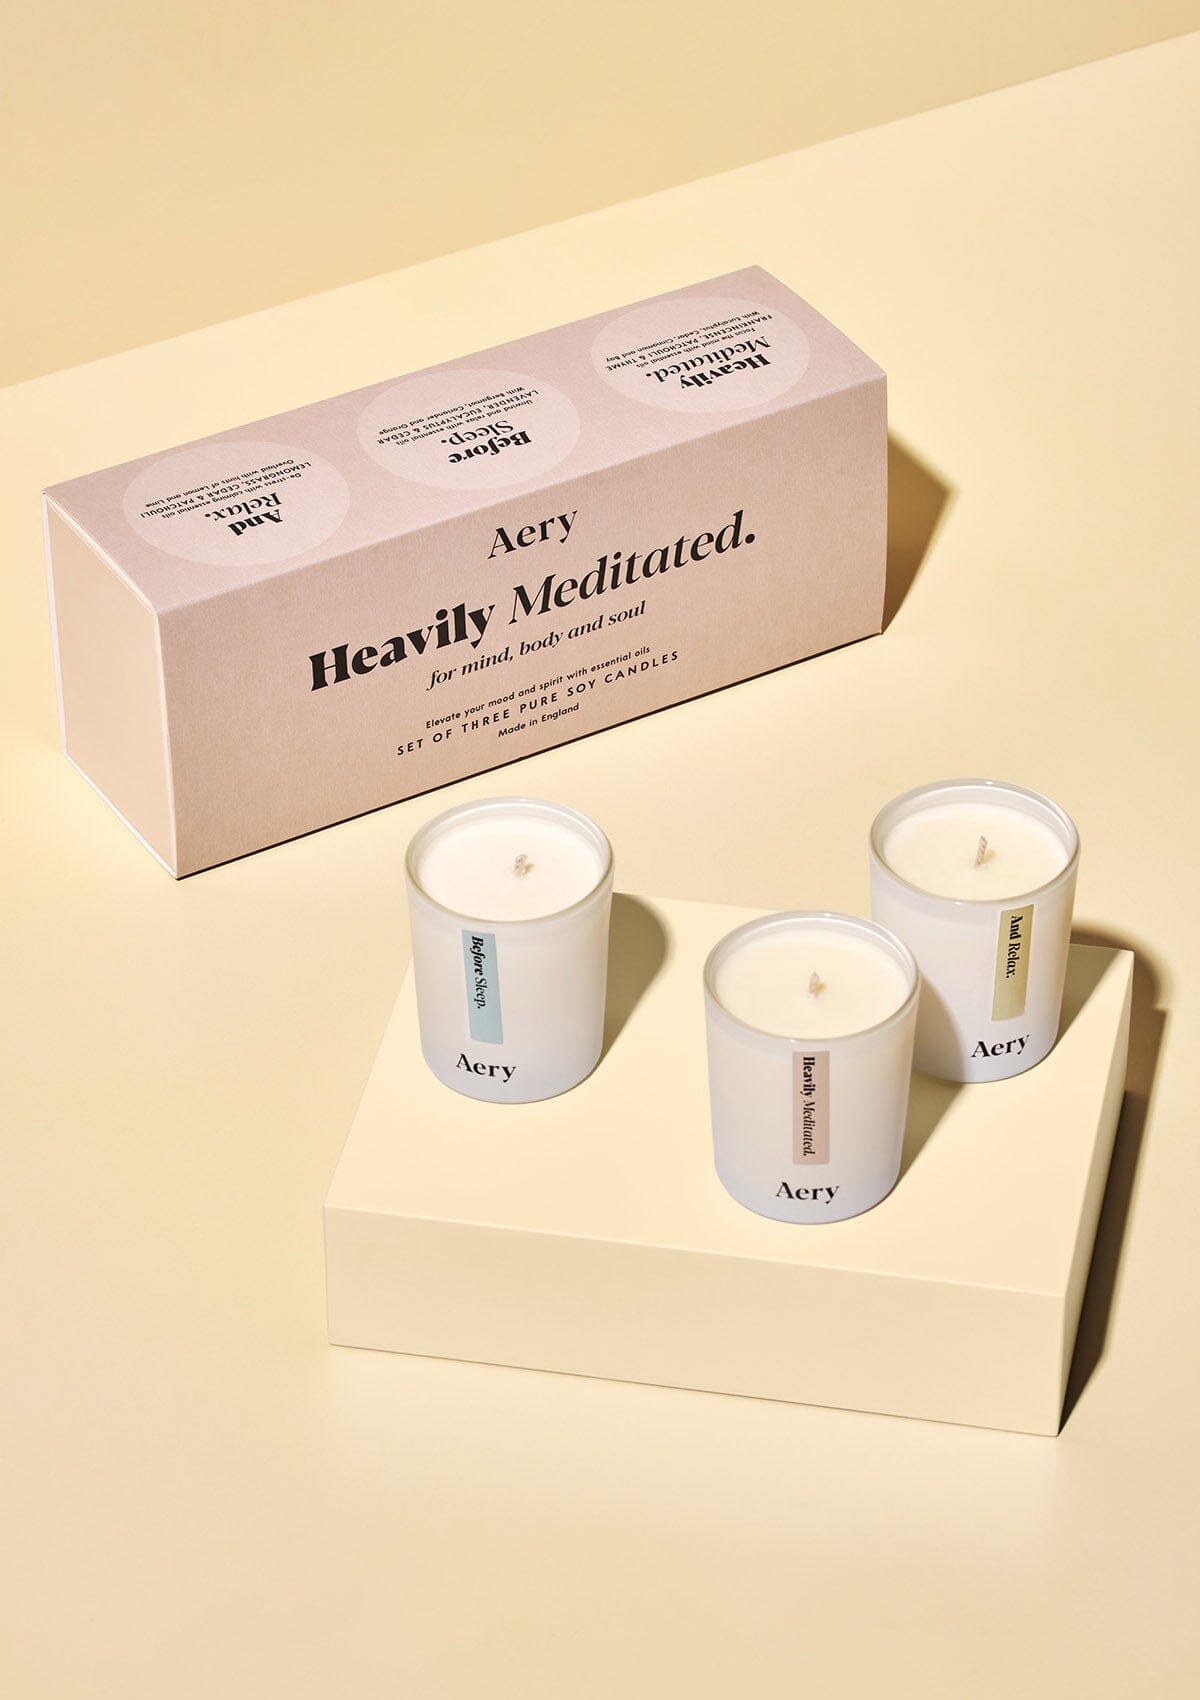 Heavily Meditated Gift Set of Three - Votive Candles